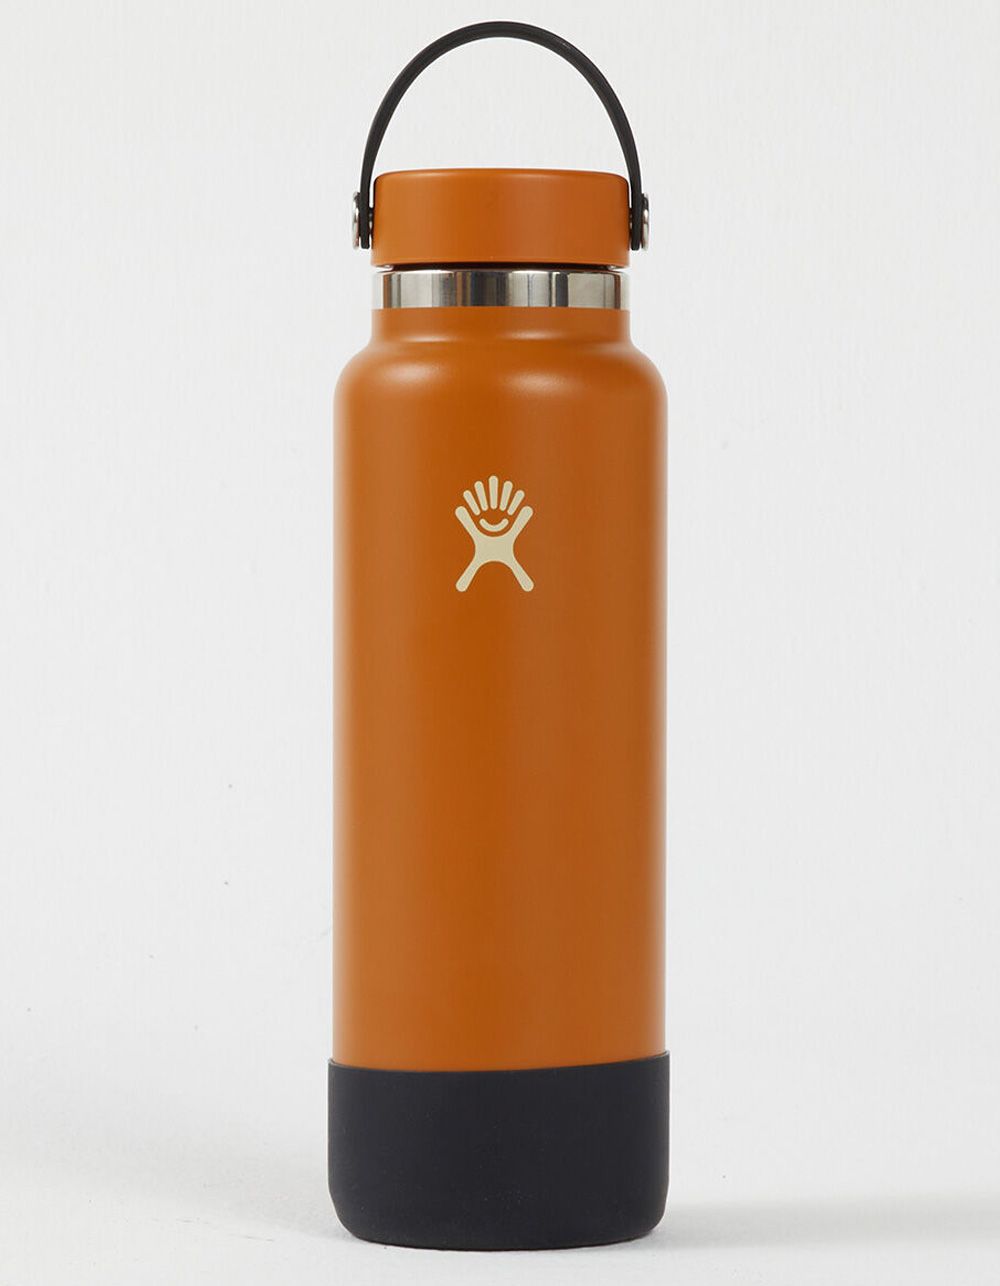 HYDRO FLASK 40 oz Wide Mouth Water Bottle - Special Edition | Tillys